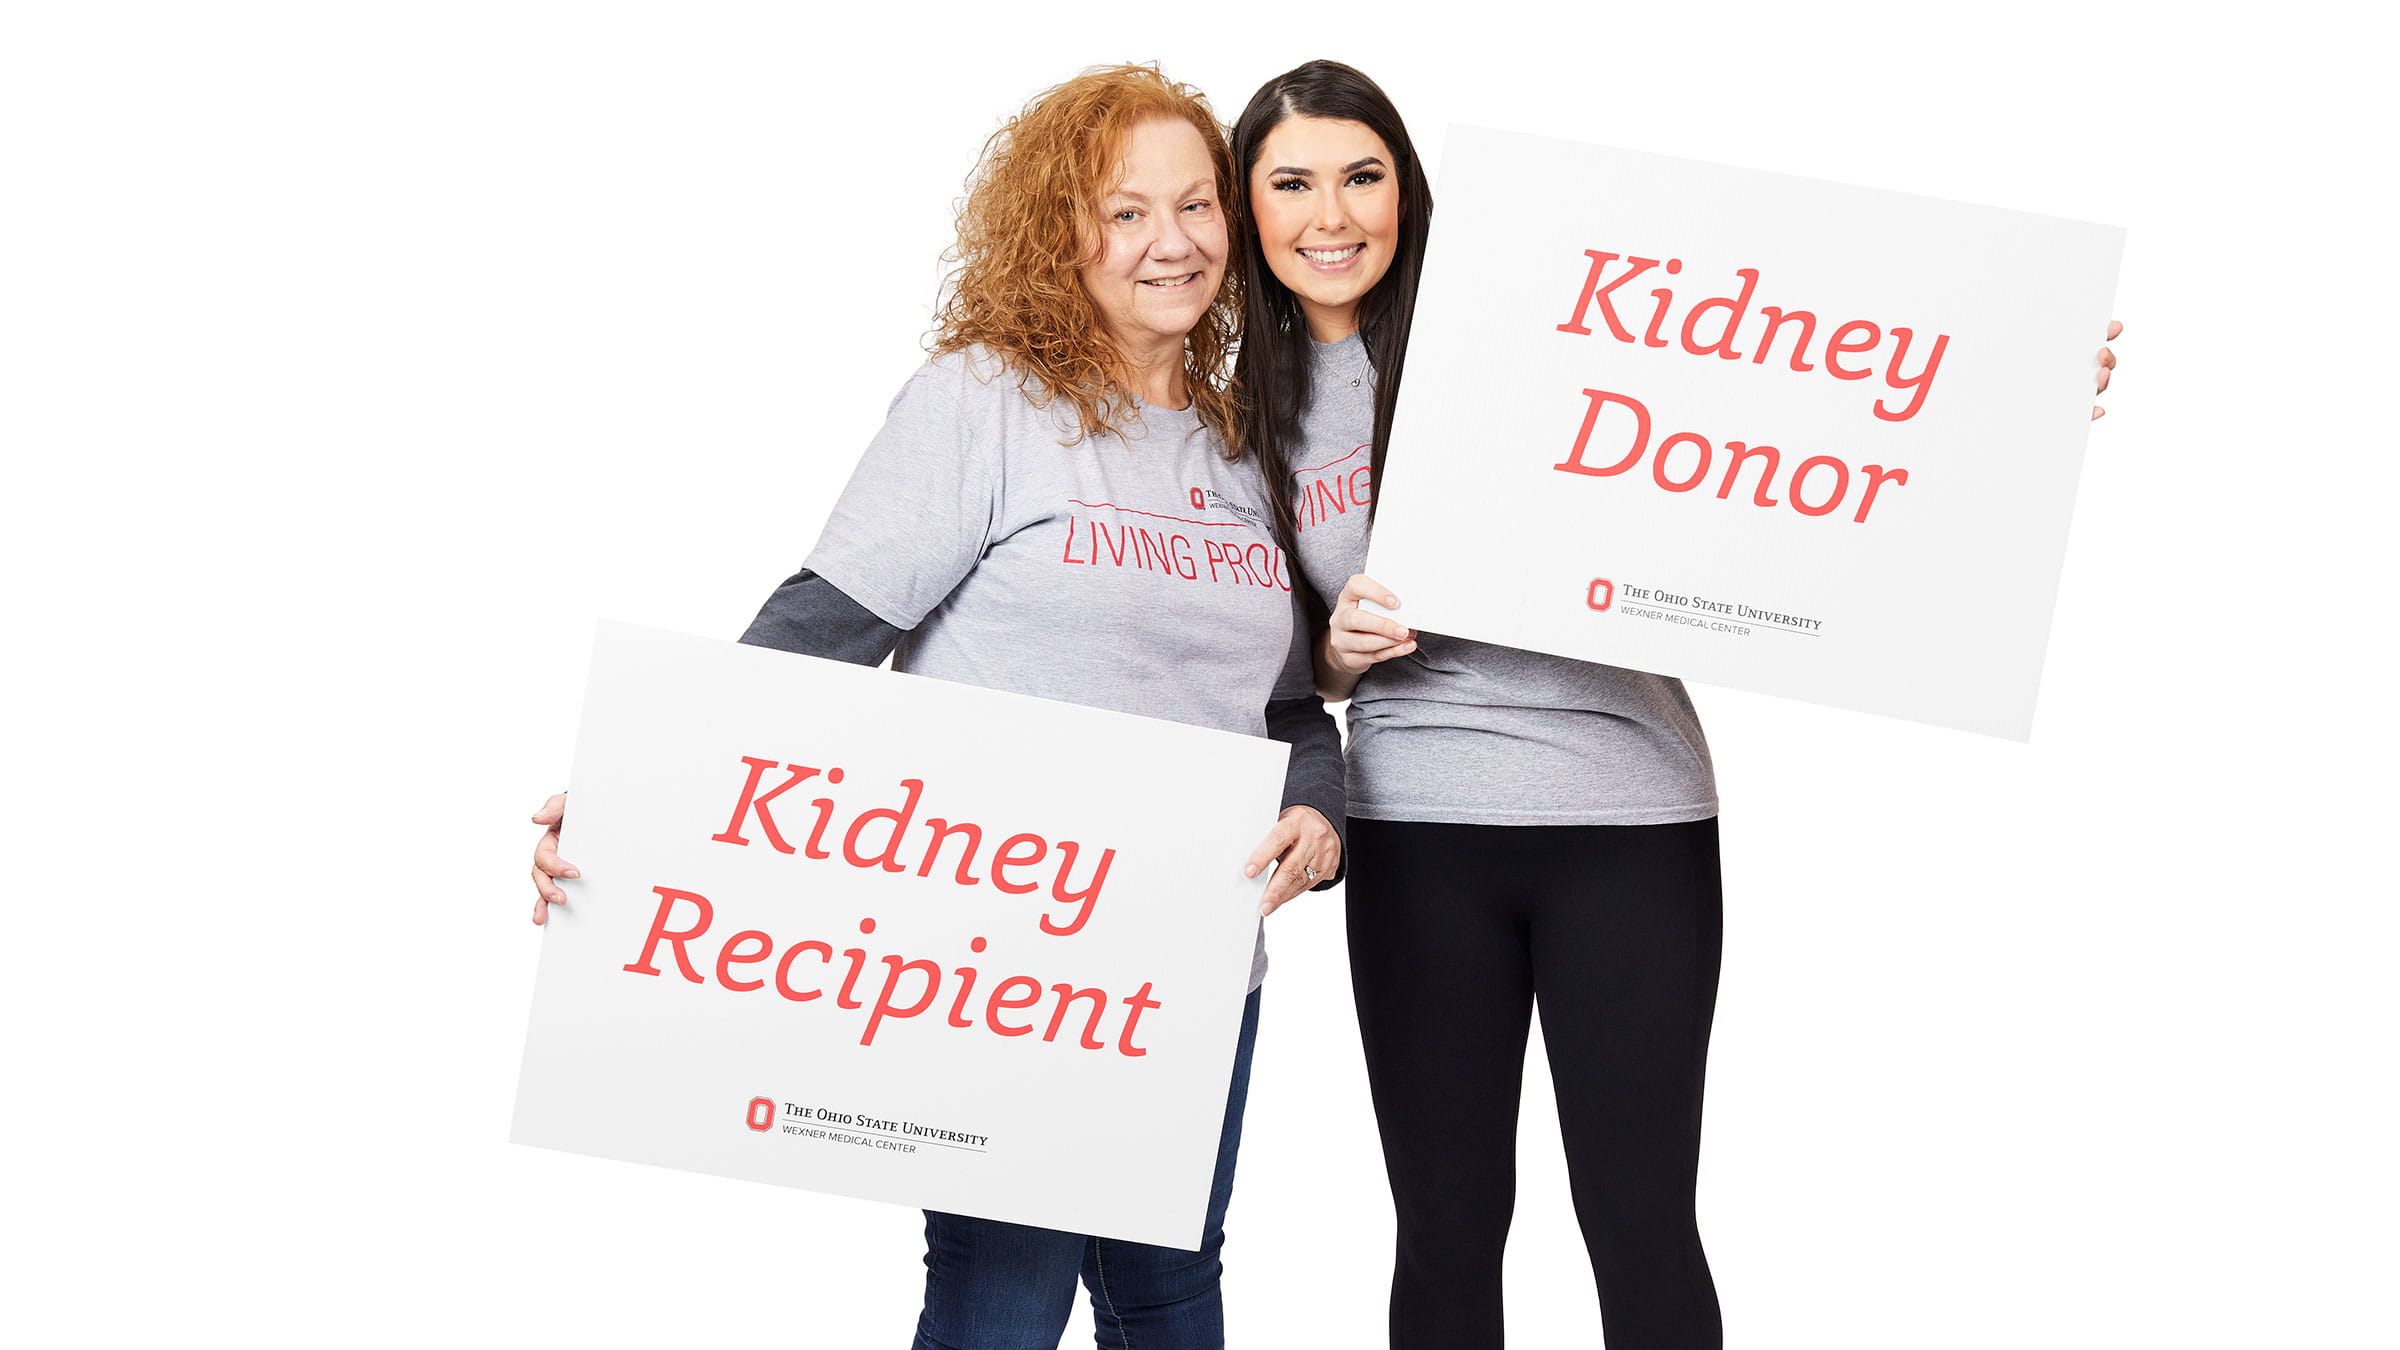 How to ask for living kidney donation